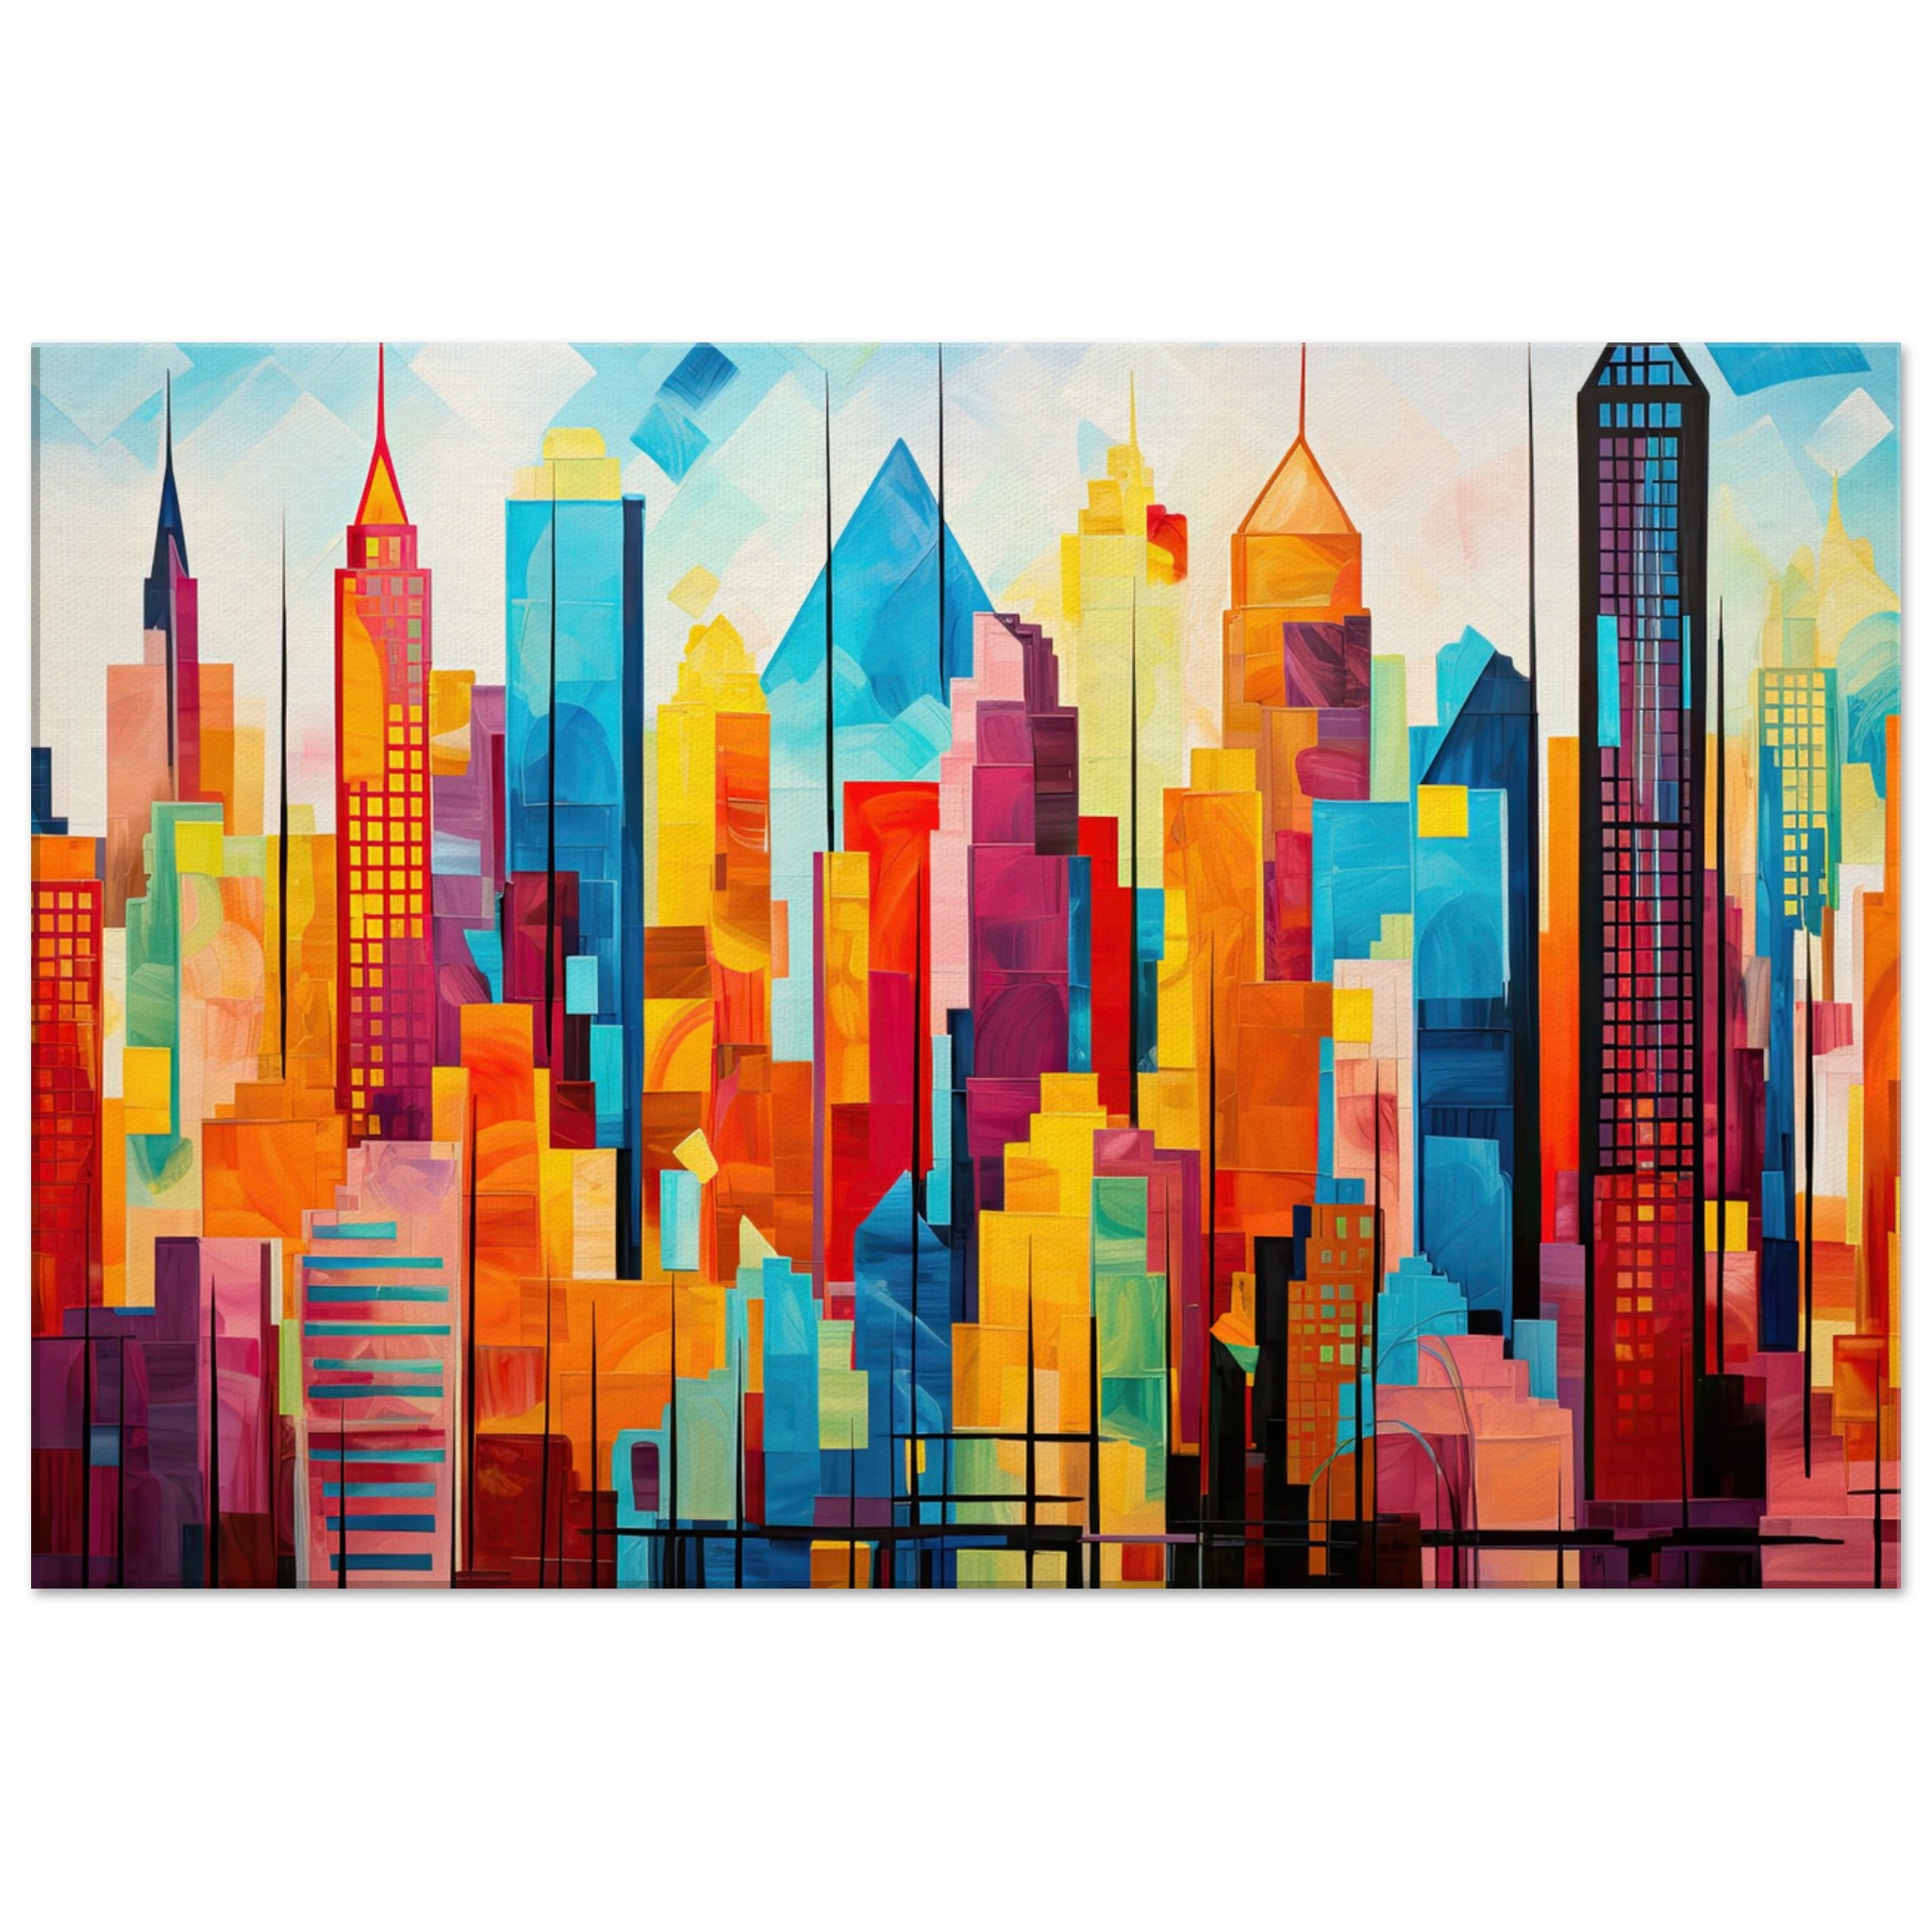 Colorful Abstract Cityscape Painted – Canvas Print – 60×90 cm / 24×36″, Thick